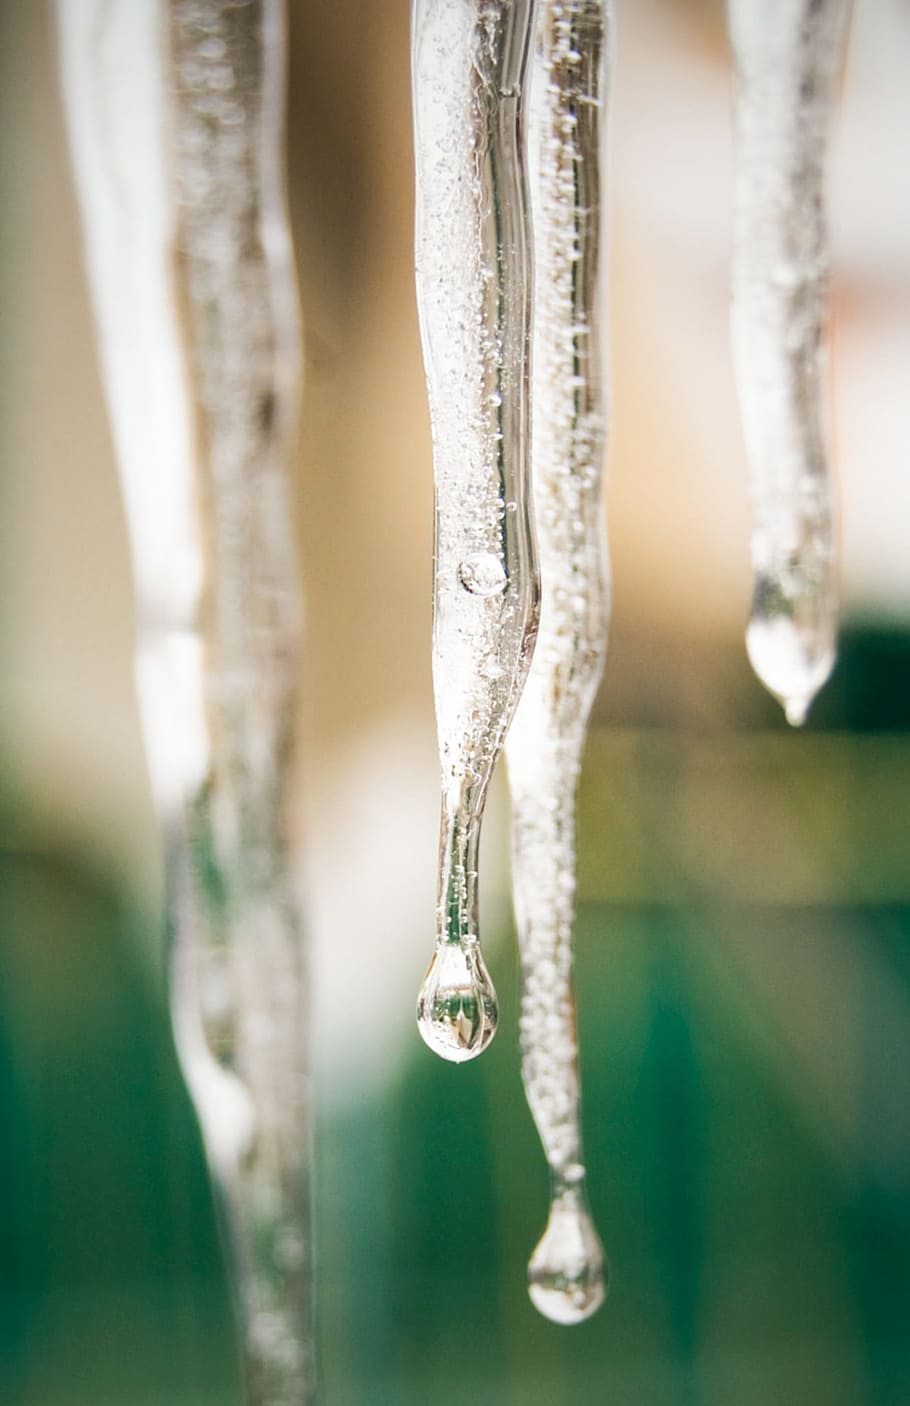 water, pearl, ice, drop, stalactite, colors, reflections, cold winter, italy, focus on foreground